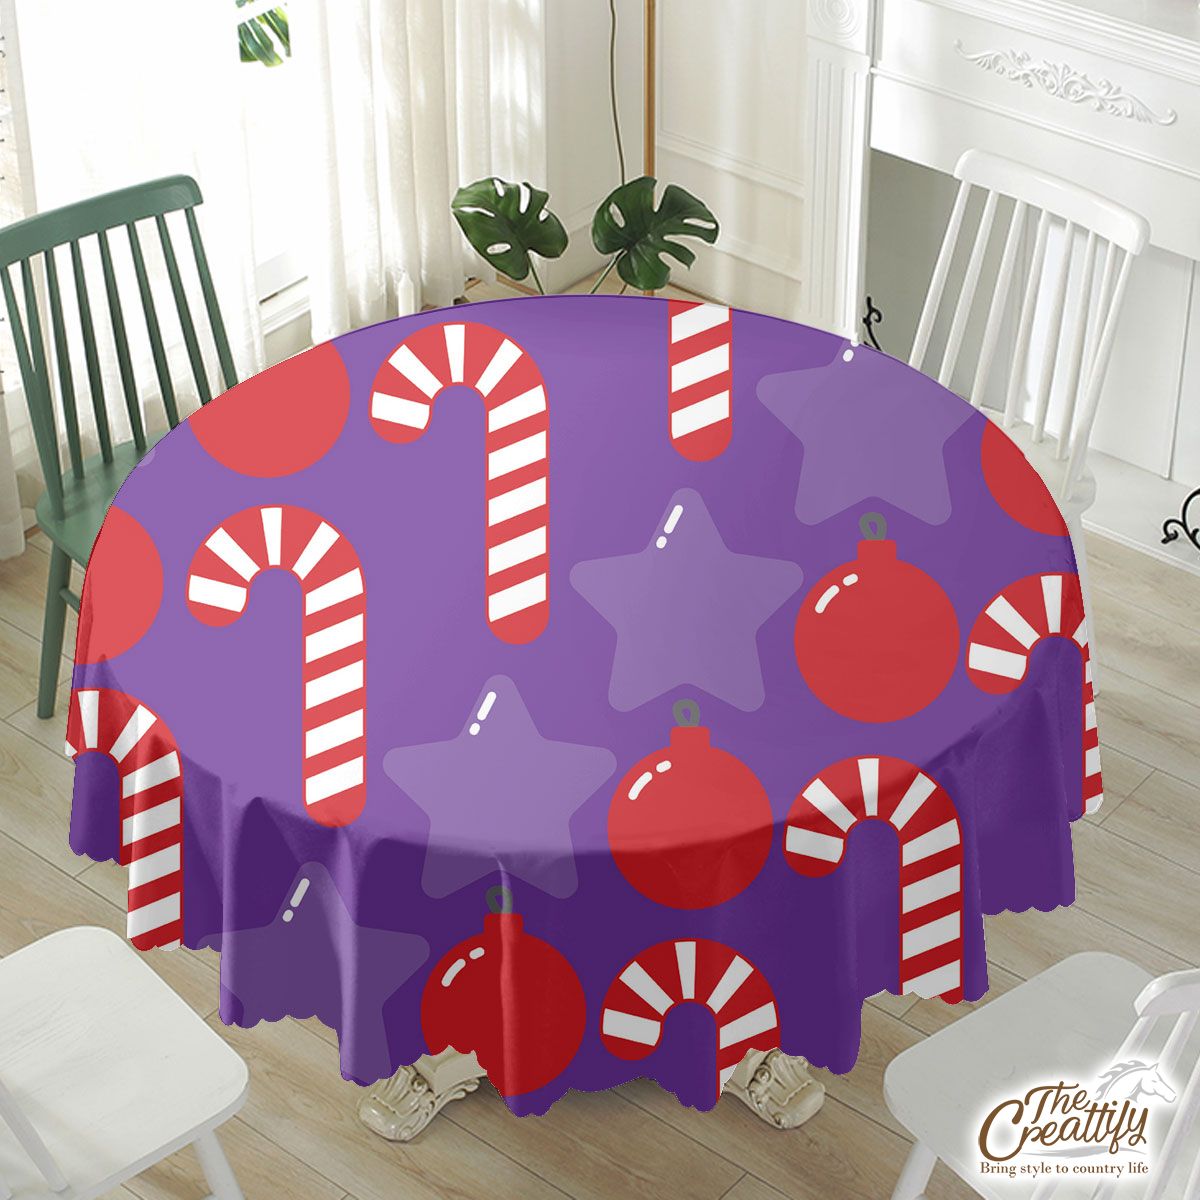 Candy Canes, Christmas Star, Christmas Balls Waterproof Tablecloth